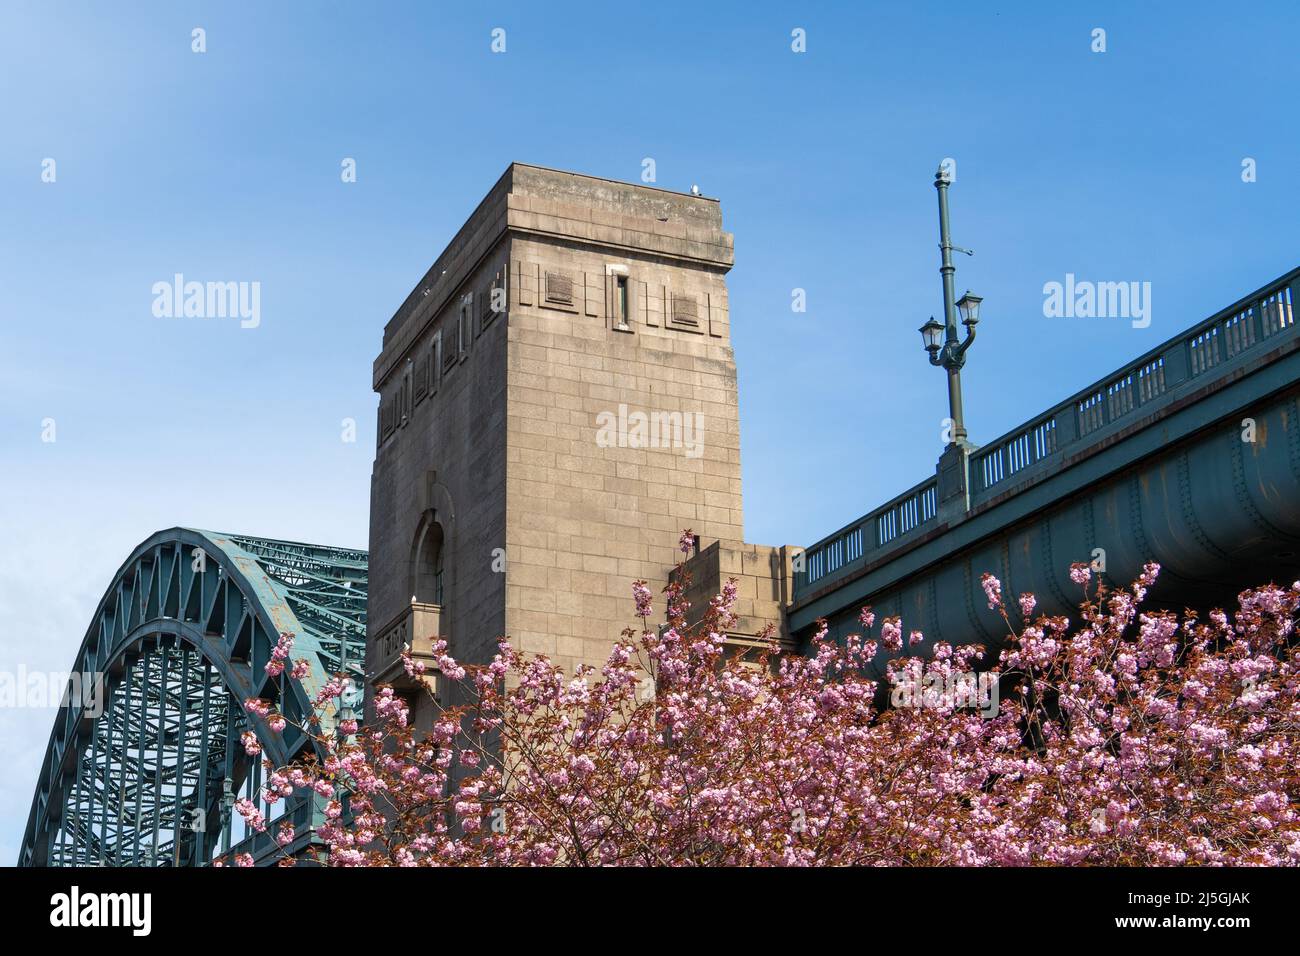 A stunning display of pink cherry blossom at the Tyne Bridge that joins Newcastle upon Tyne and Gateshead, UK. Credit: Hazel Plater/Alamy Stock Photo